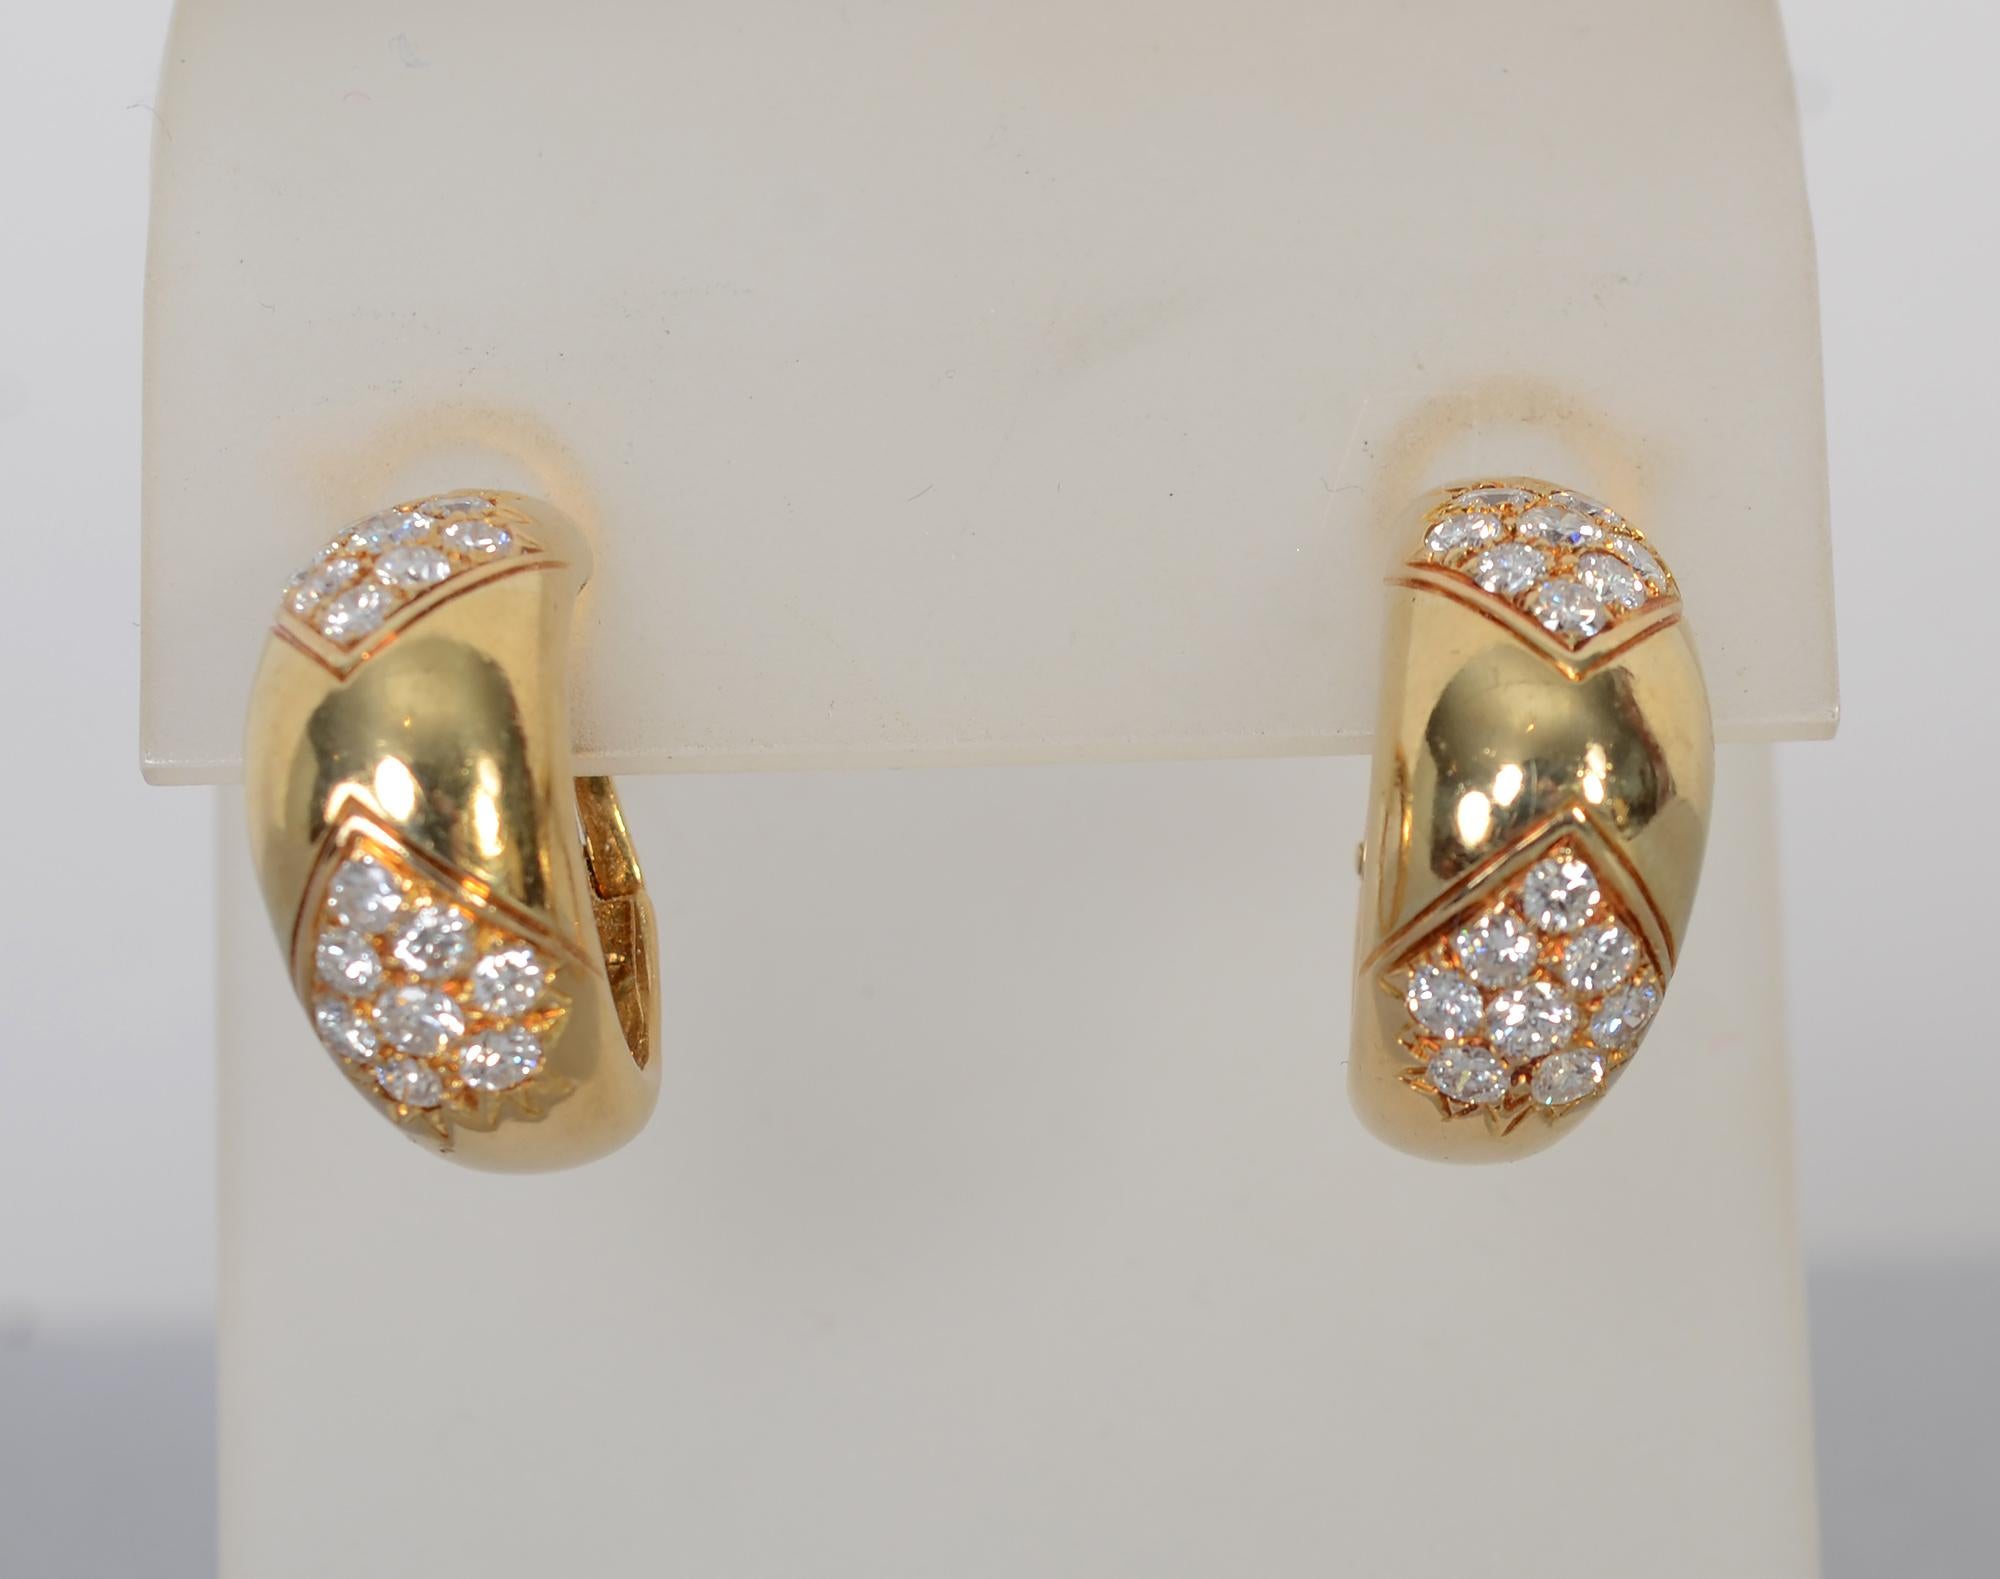 Faraone half hoop 18 karat gold earrings with two clusters of diamonds. The pair of earrings has 32 diamonds with a total weight of 1.3 carats.
The earrings have clip backs to which posts can easily be added.
They measure 3/4